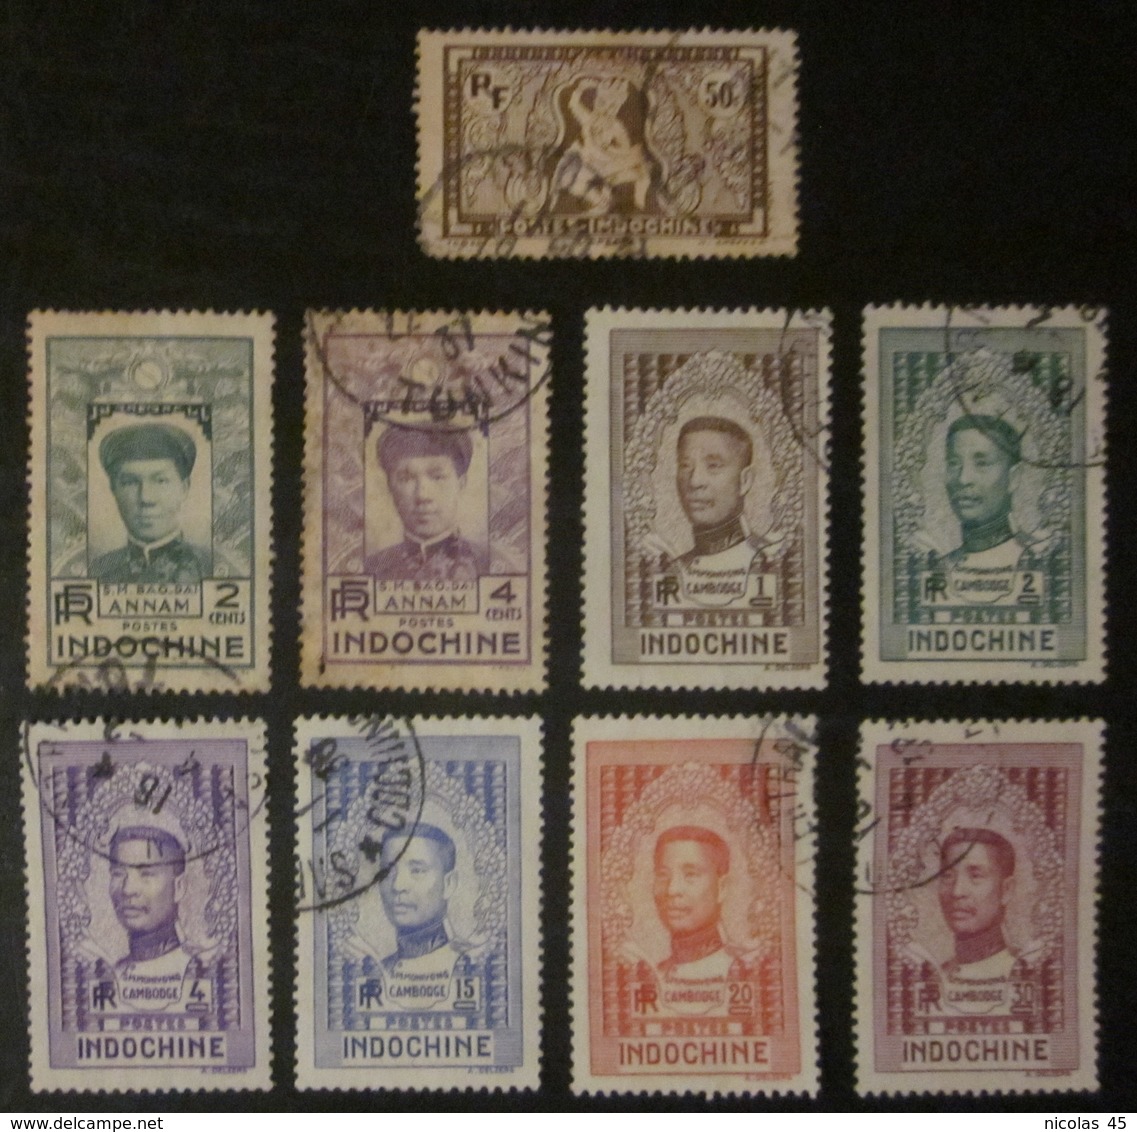 Indochine - YT 167 172 173 182 183 184 187 188 189 - Used Stamps